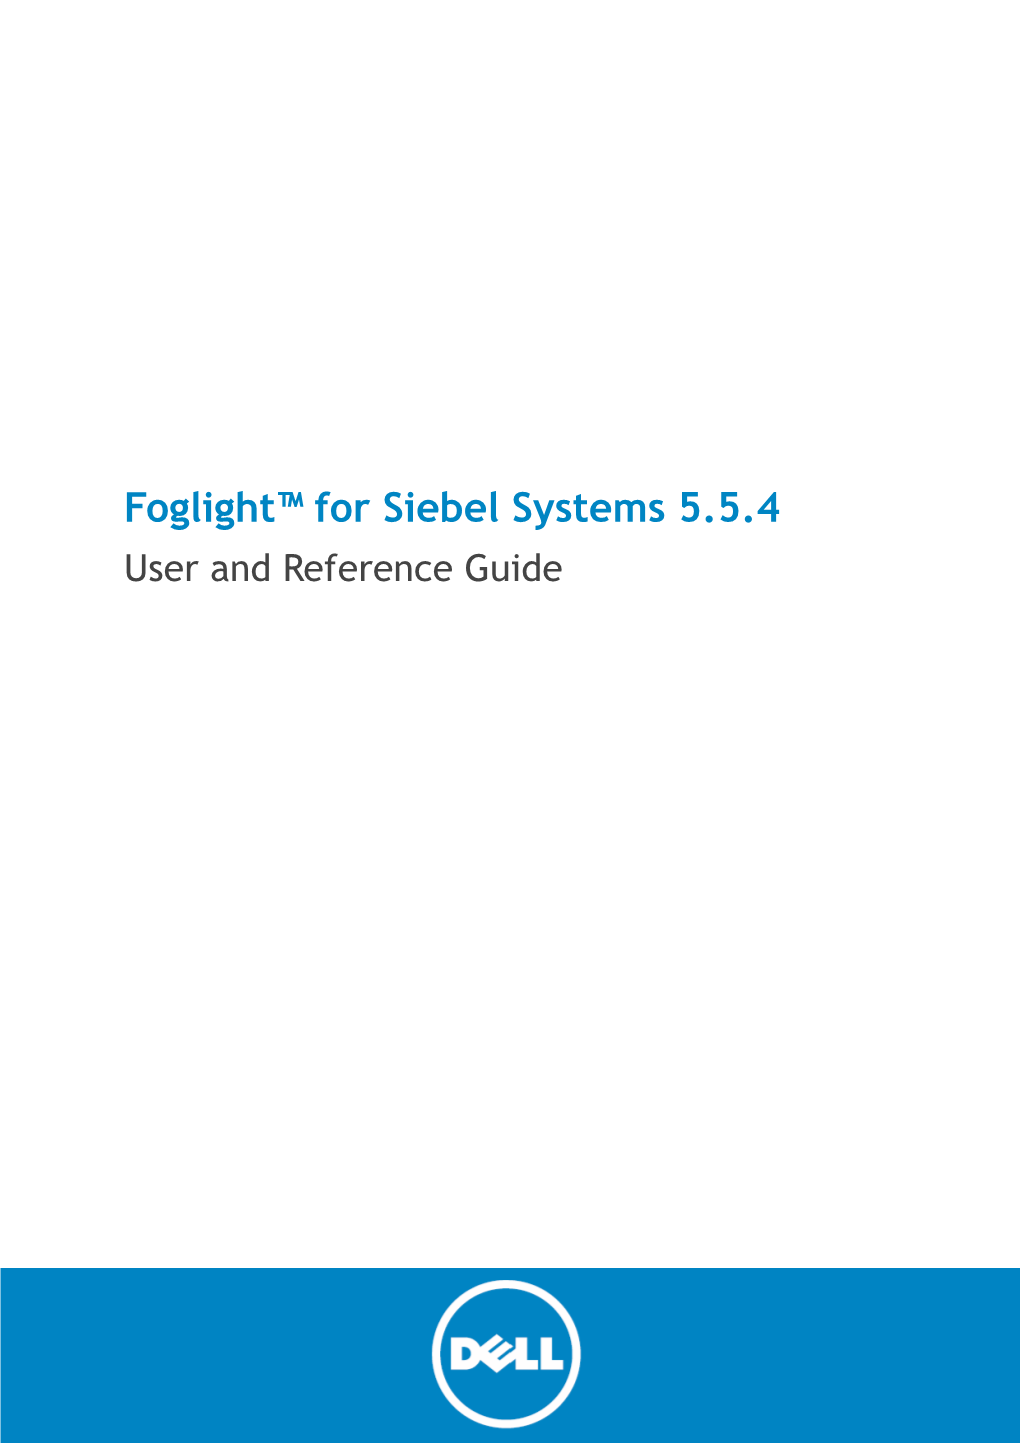 Foglight for Siebel Systems User and Reference Guide Updated - February 2015 Software Version - 5.5.4 Contents